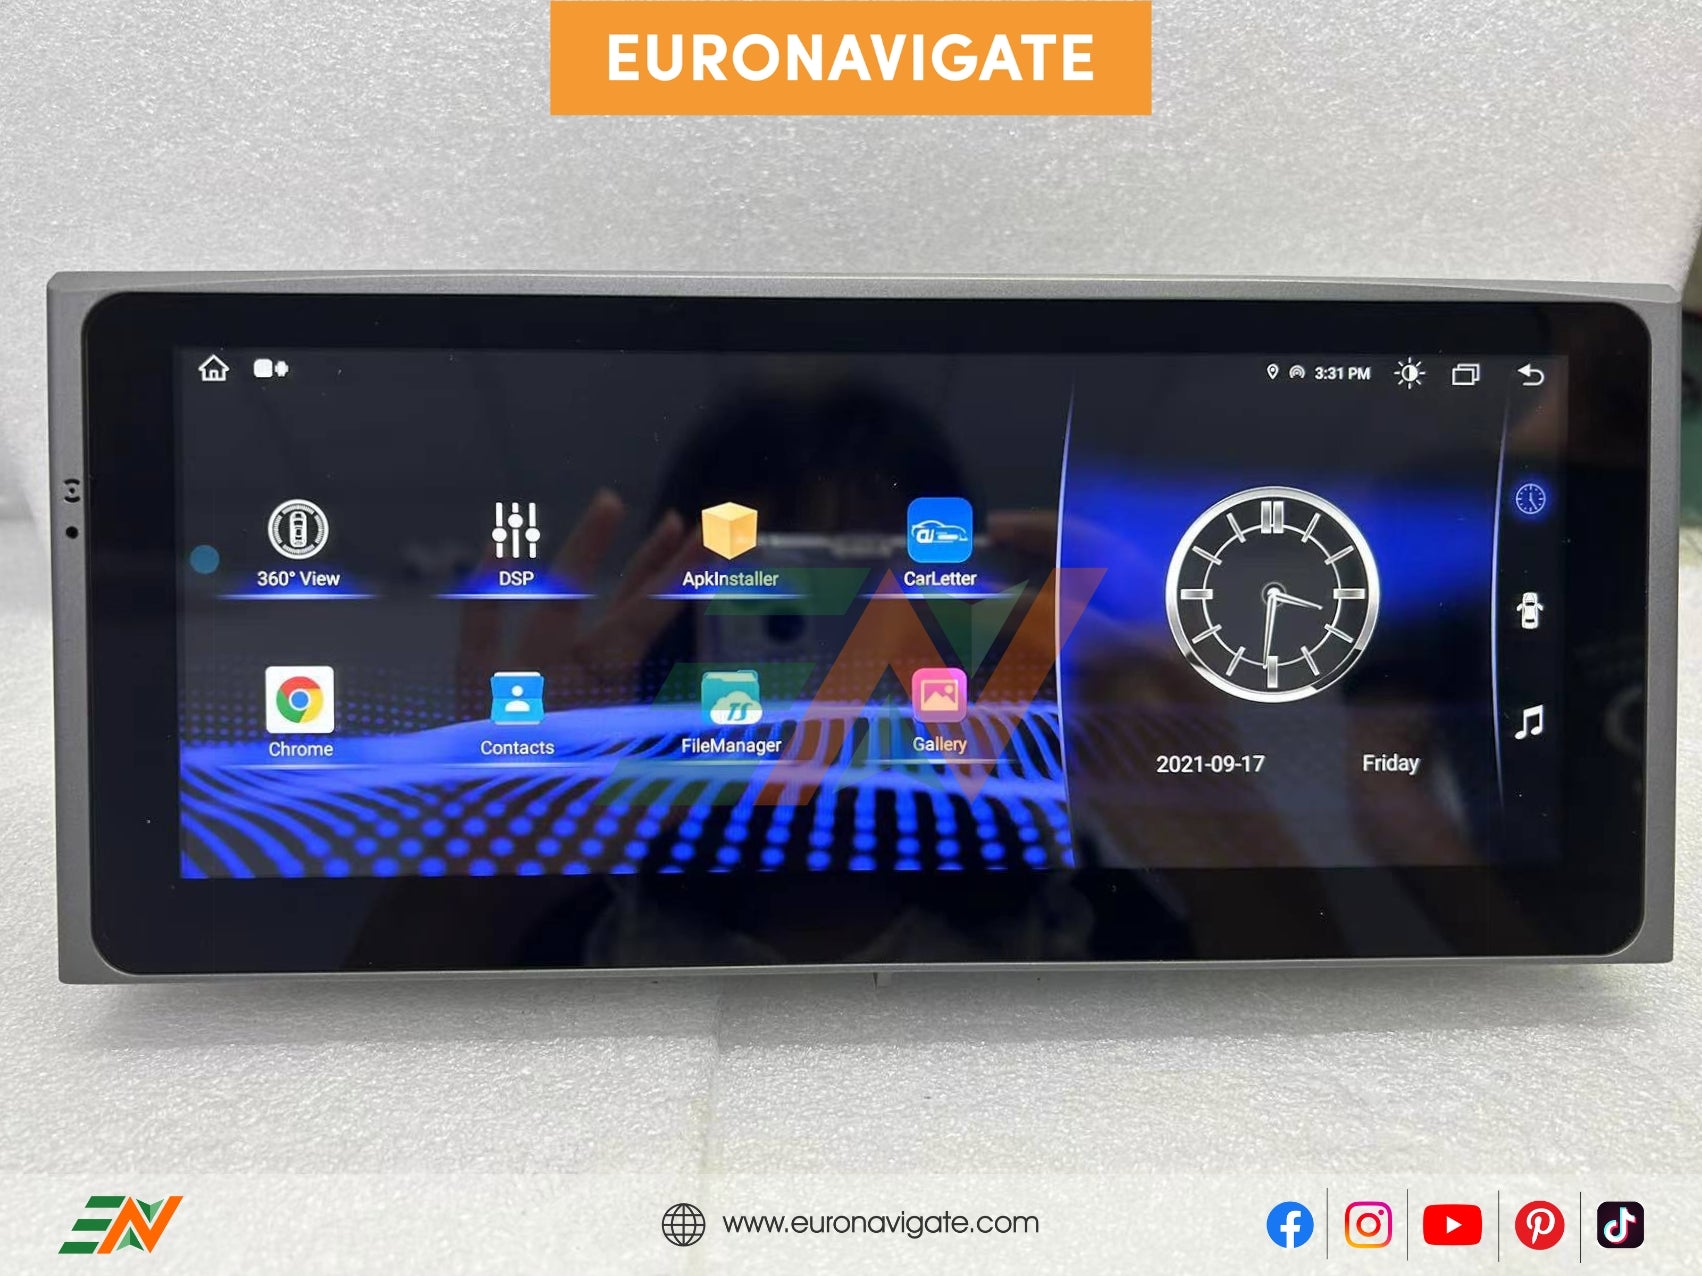 Upgrade your Range Rover L322 with Euronavigate's 10.25-inch Android Touch Screen Interface